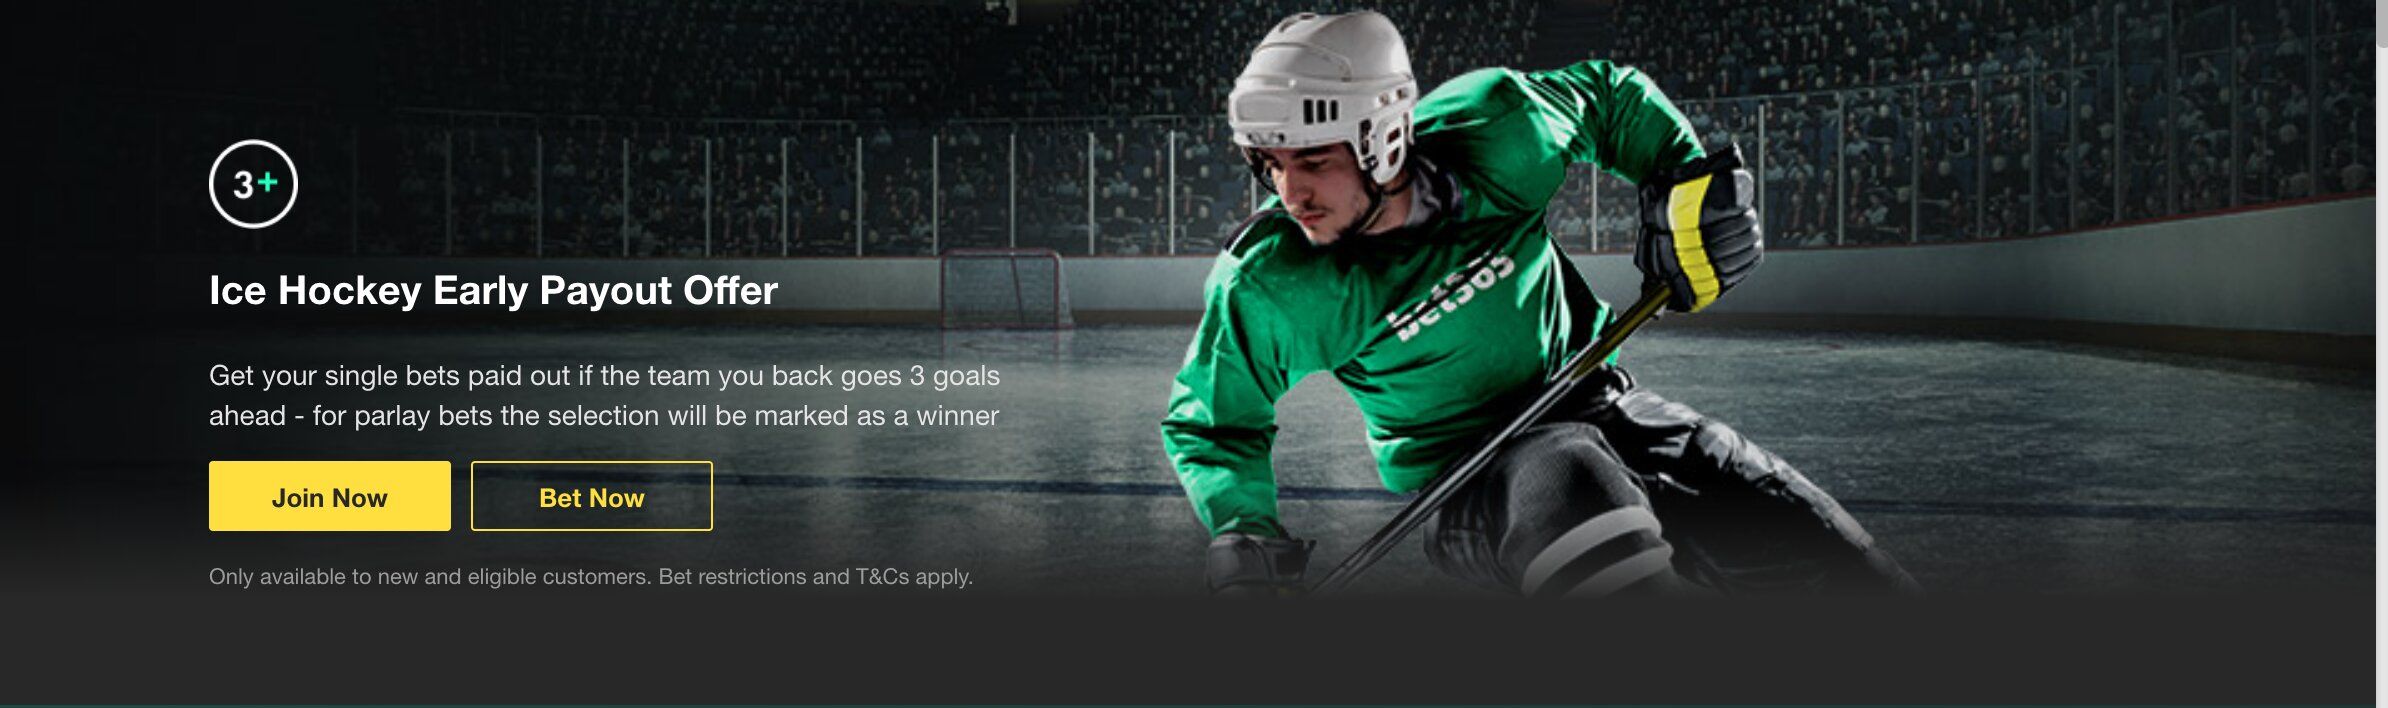 Bet365 Ice Hockey Early Payout Offer